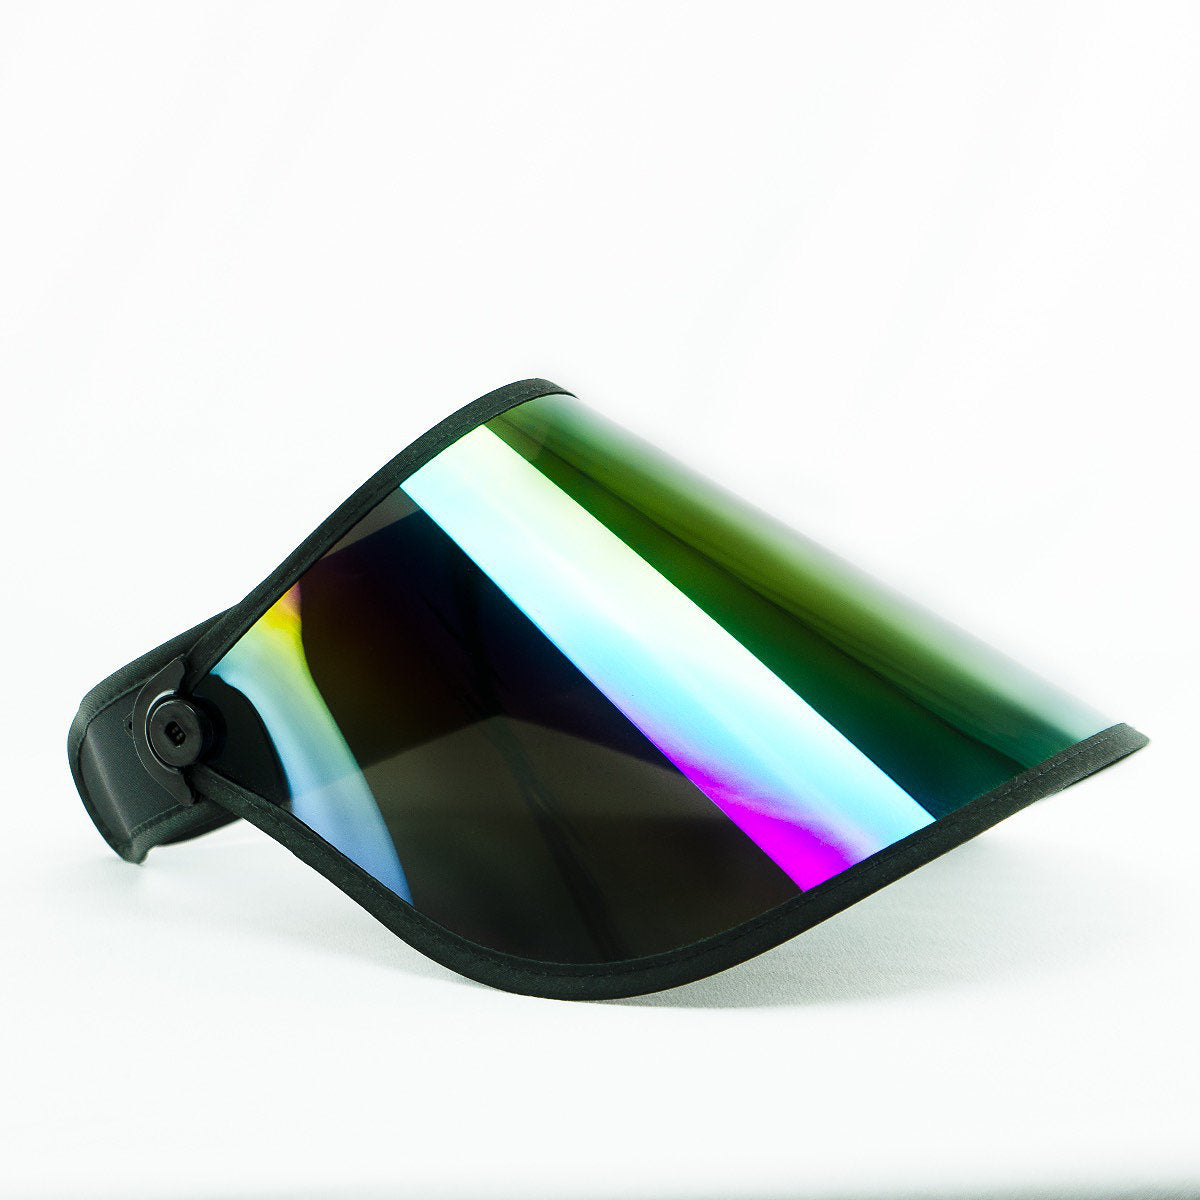 Bluestone Sunshields presents the FULL SHIELD RAINBOW, ideal for outdoor activities requiring extra protection.